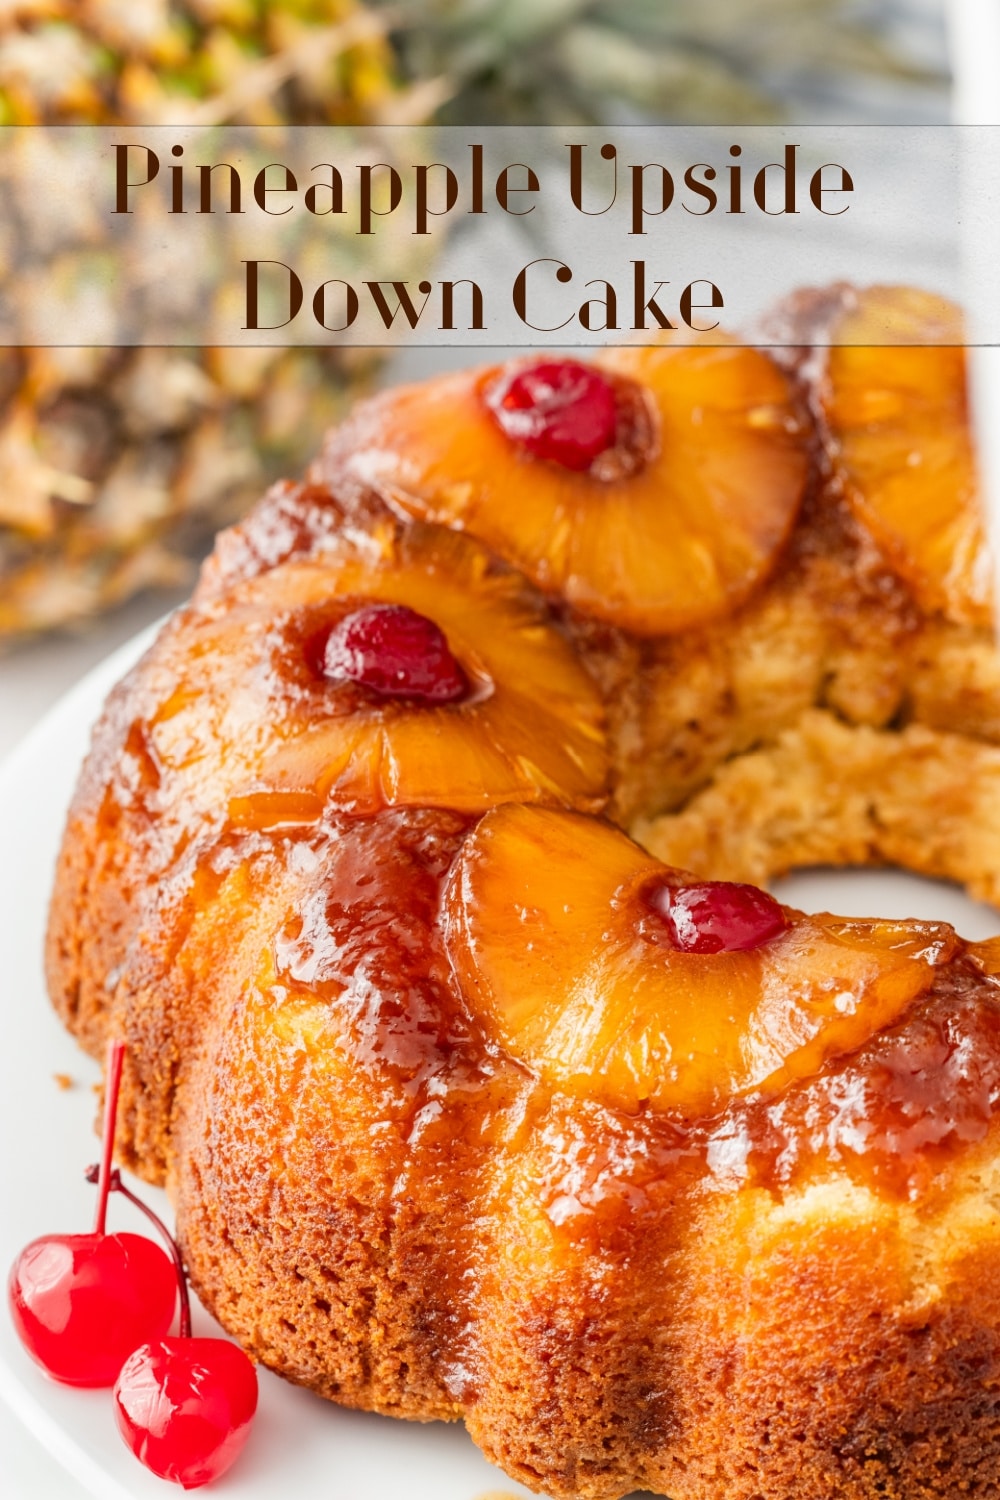 This timeless Pineapple Upside Down Cake has earned its delicious status for a reason. A decadent, buttery Bundt crowned with aromatic pineapple and cherries, it's a kitchen-friendly creation that's simple to whip up. via @cmpollak1